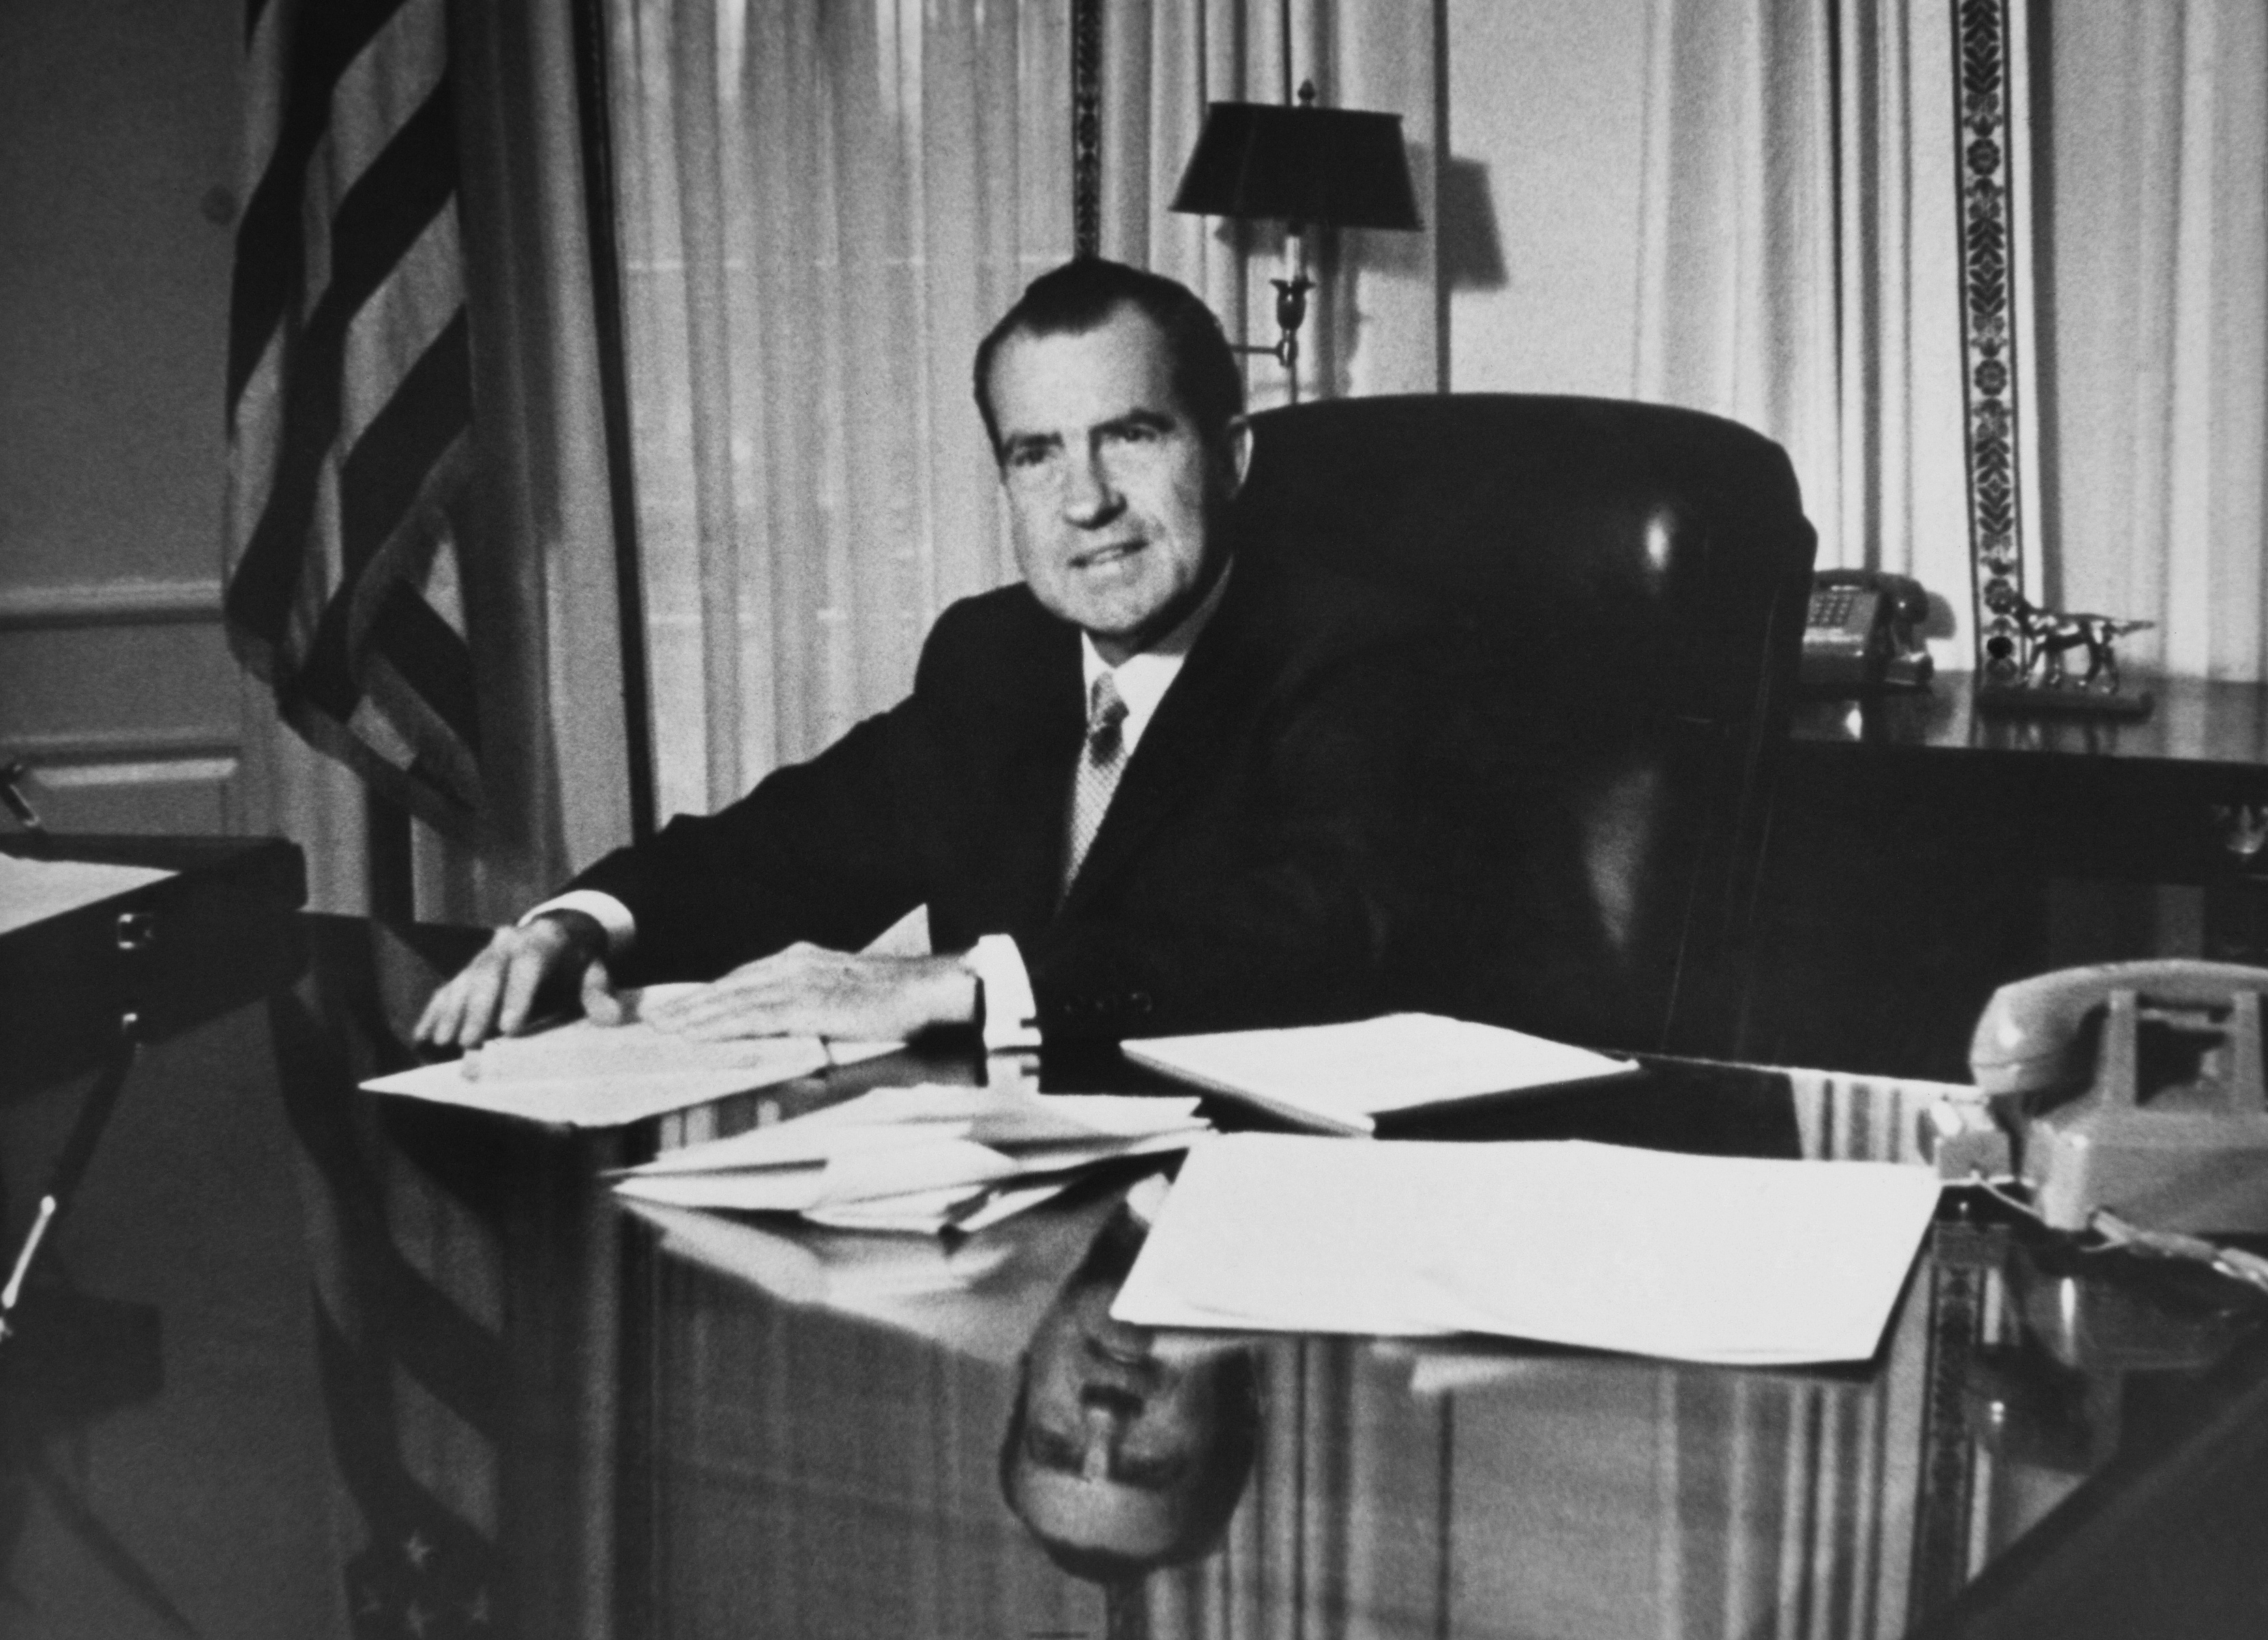 The President Nixon At His Presidential Office At White House In Usa On January 23Rd 1969